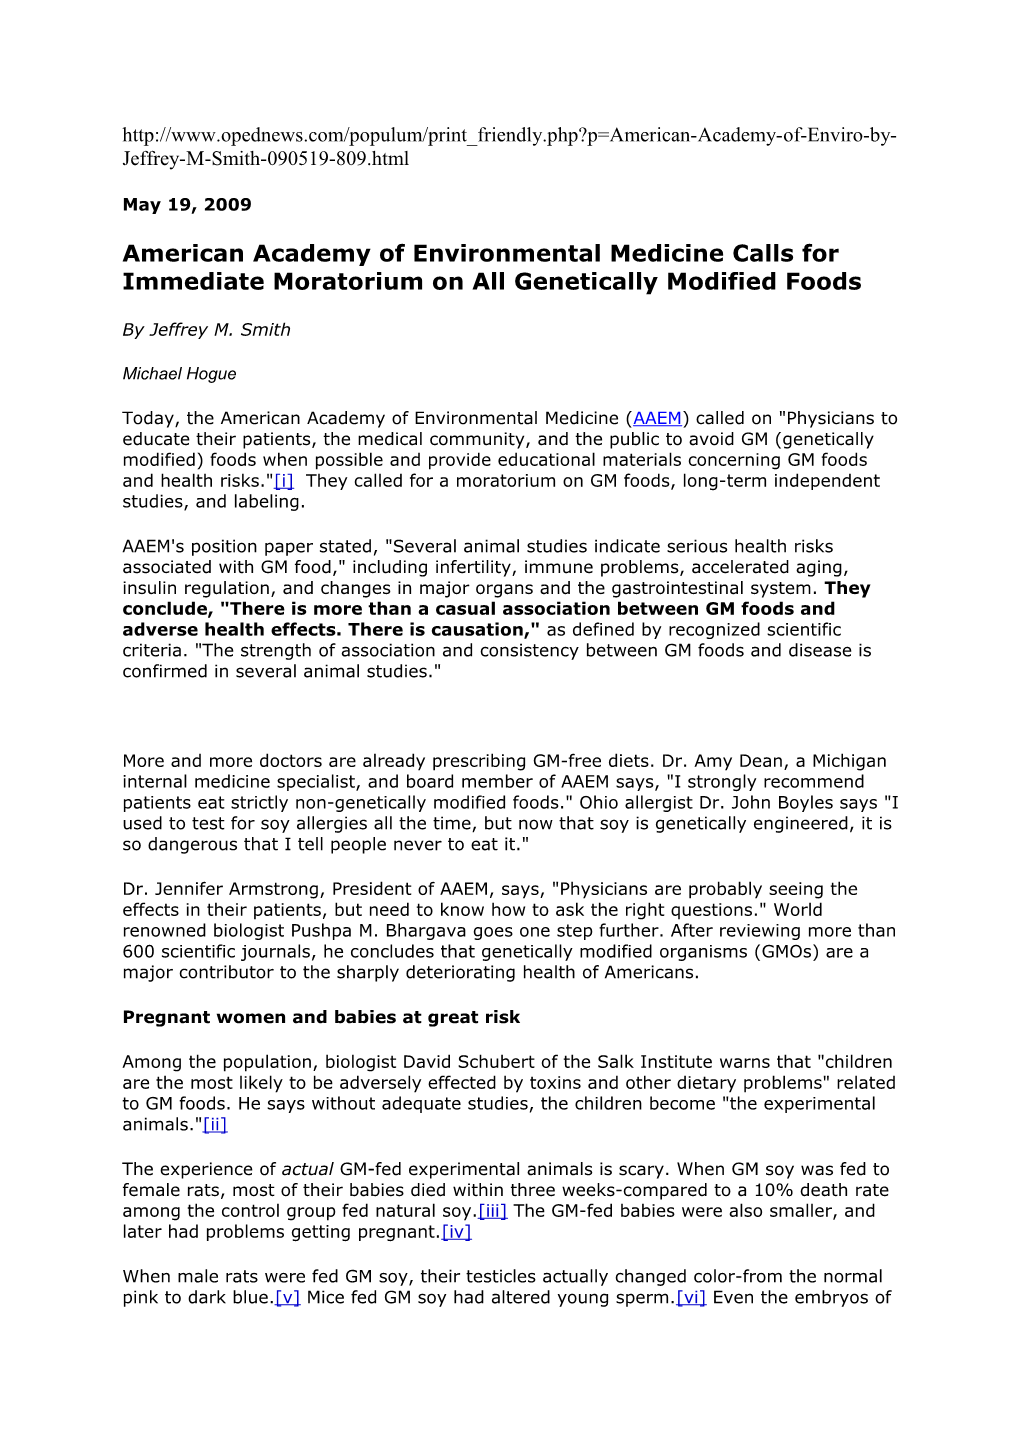 American Academy of Environmental Medicine Calls for Immediate Moratorium on All Genetically